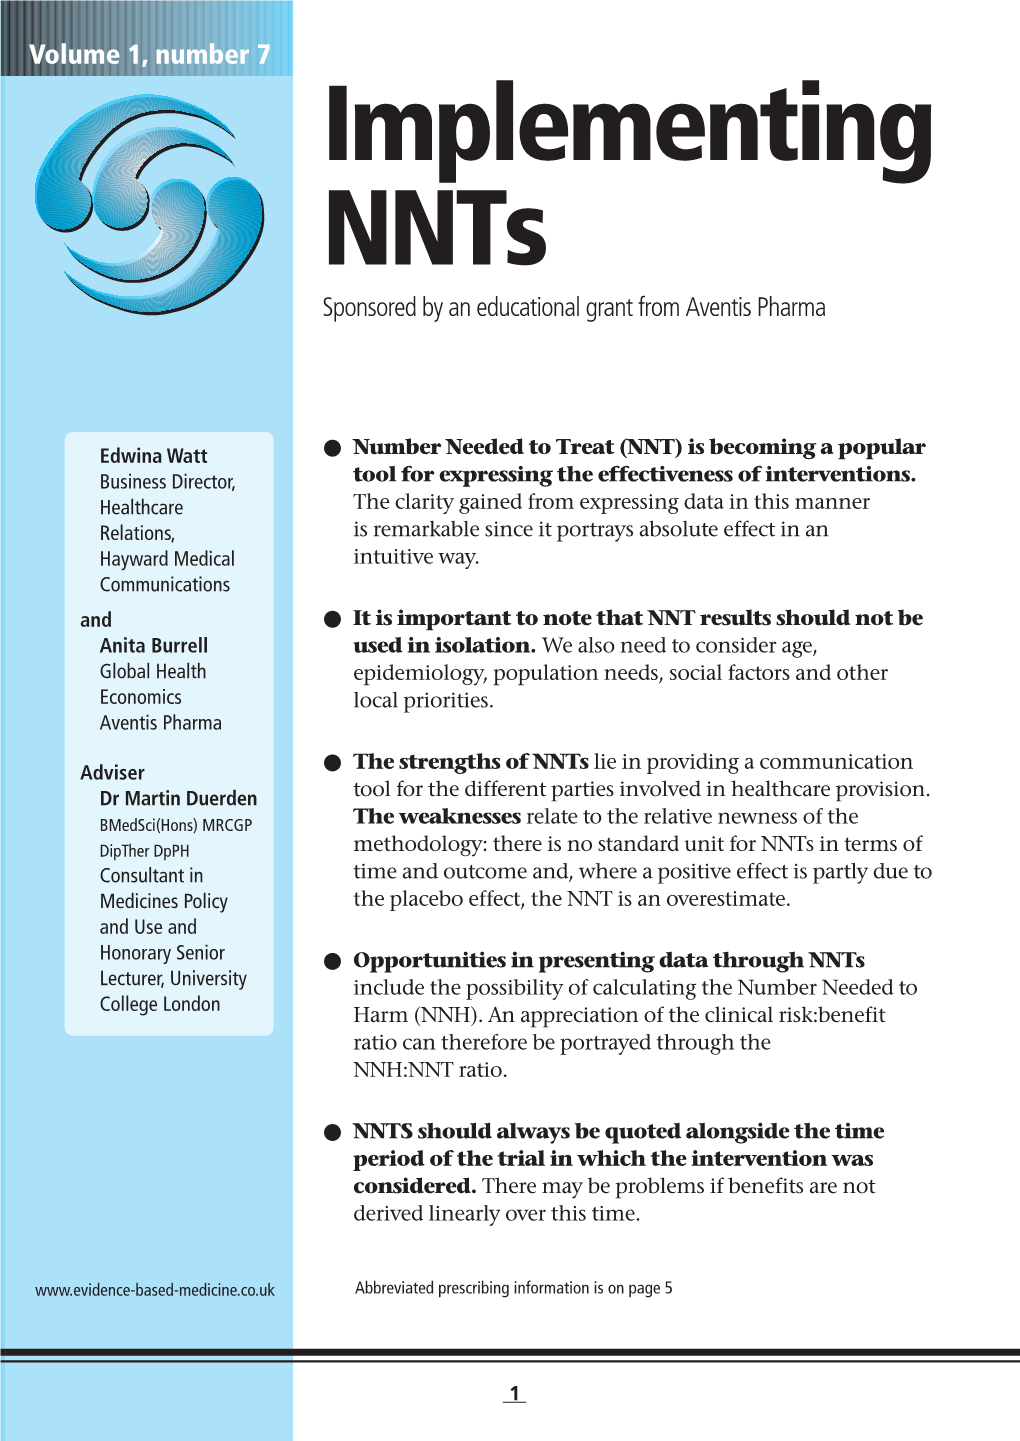 Implementing Nnts Sponsored by an Educational Grant from Aventis Pharma